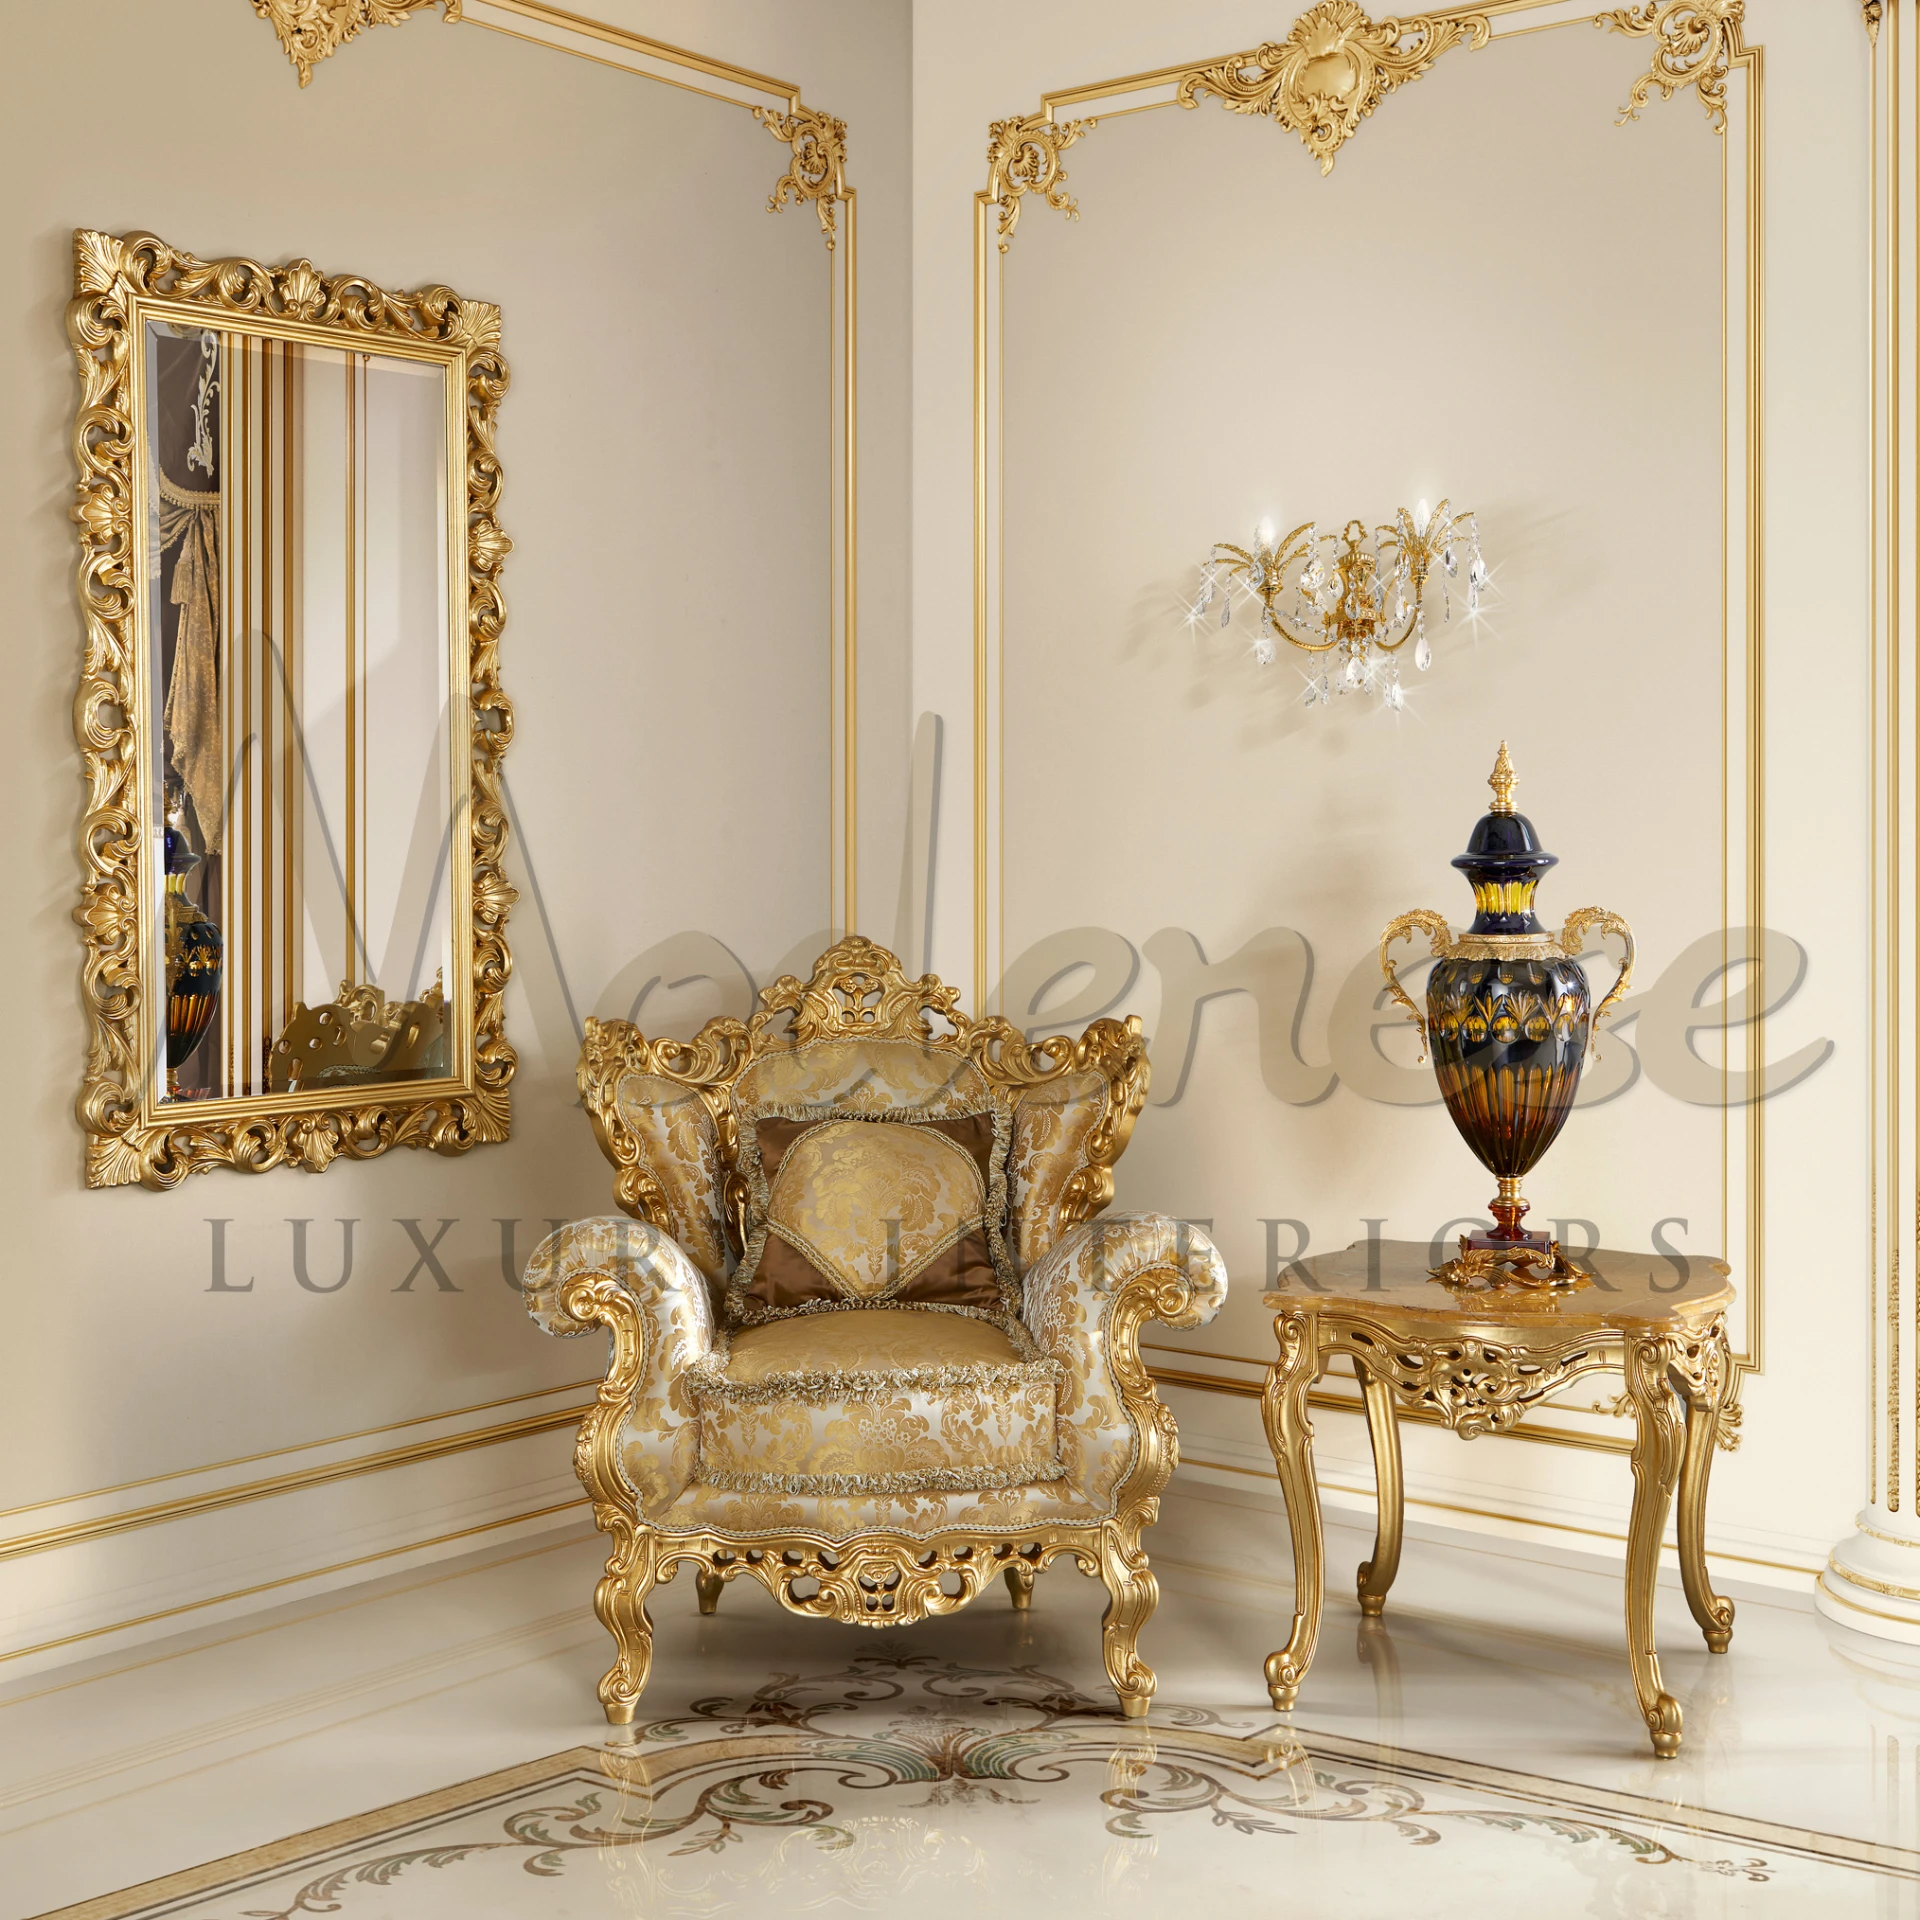 Premium Baroque Armchair with luxurious style, designed by Modenese with Venetian style furniture influence and high-quality materials.
